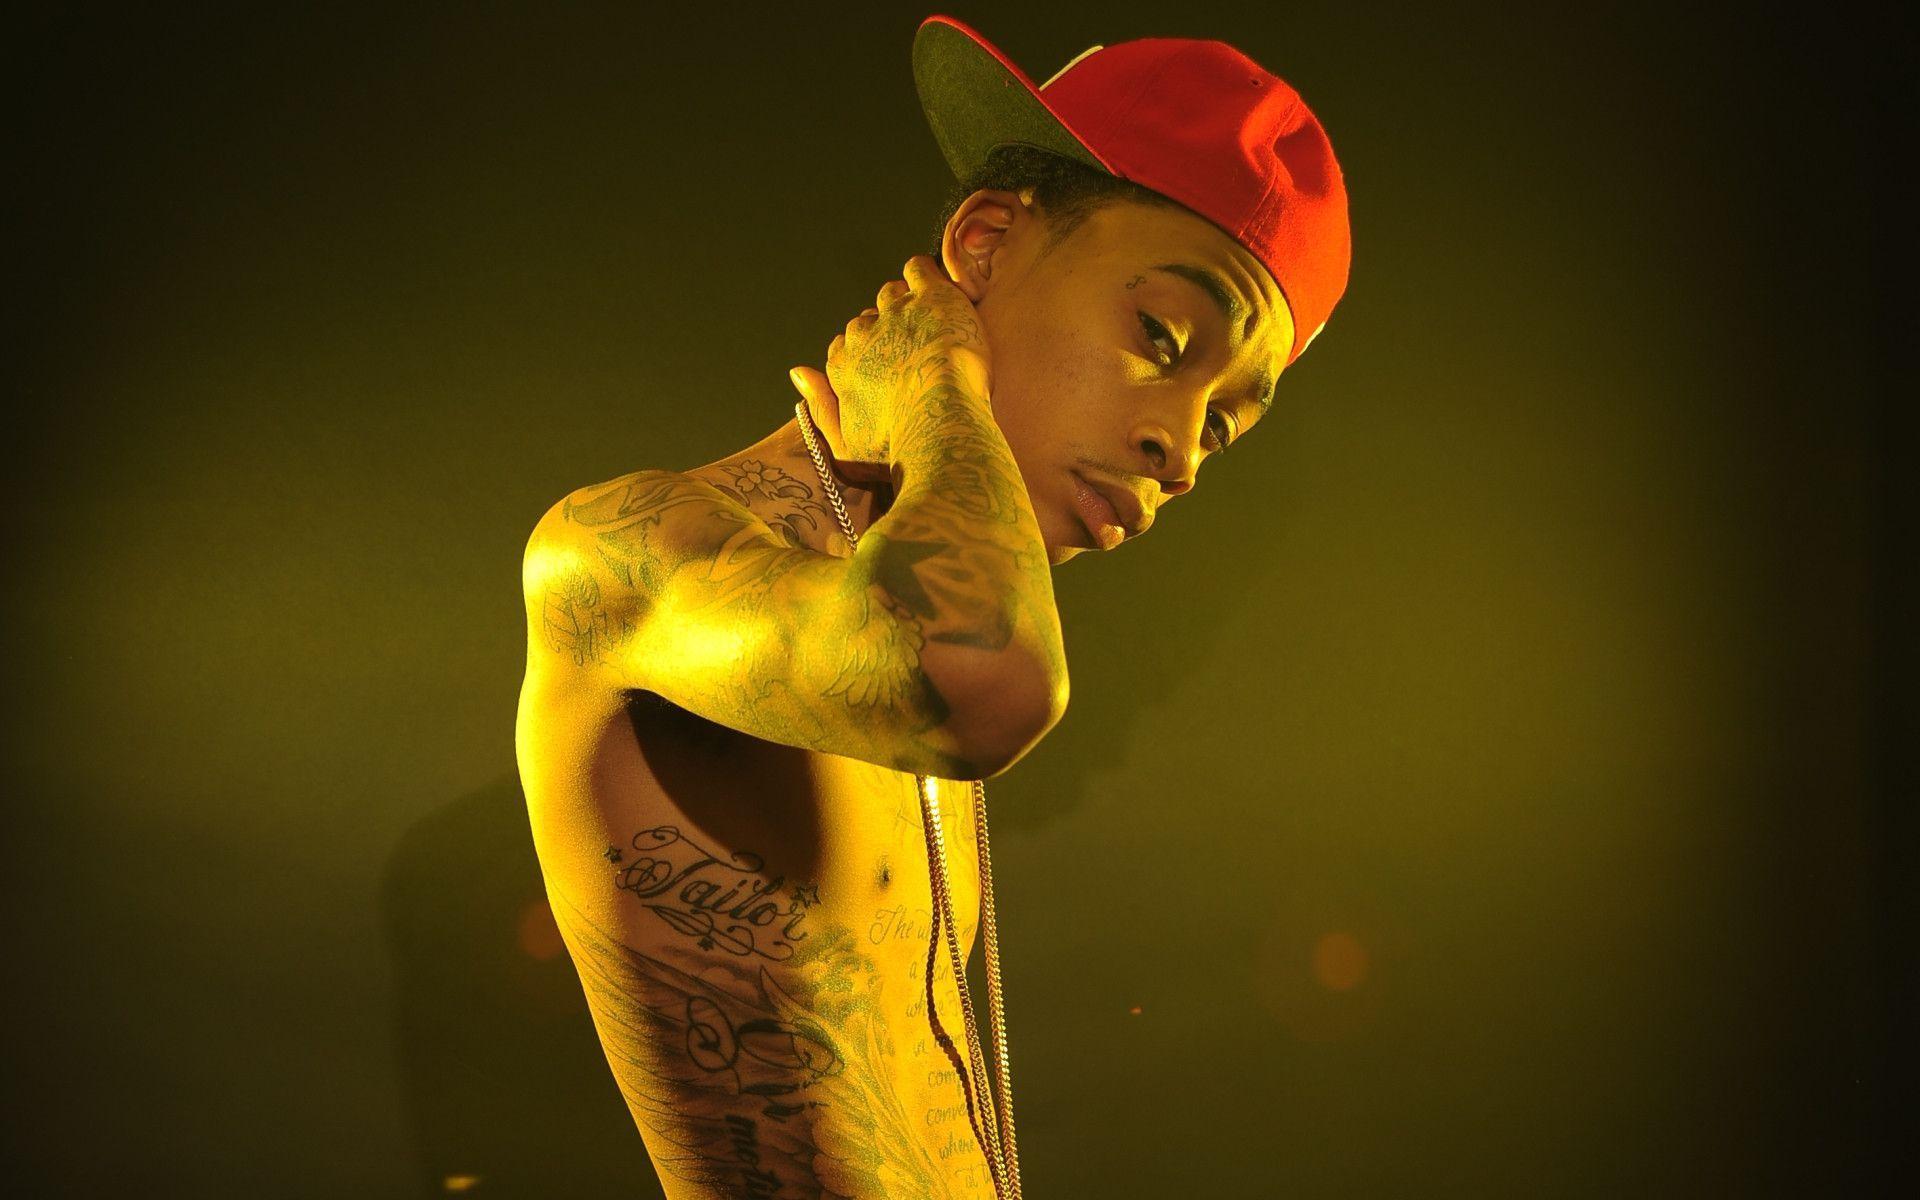 Image For > Wiz Khalifa Wallpapers Iphone